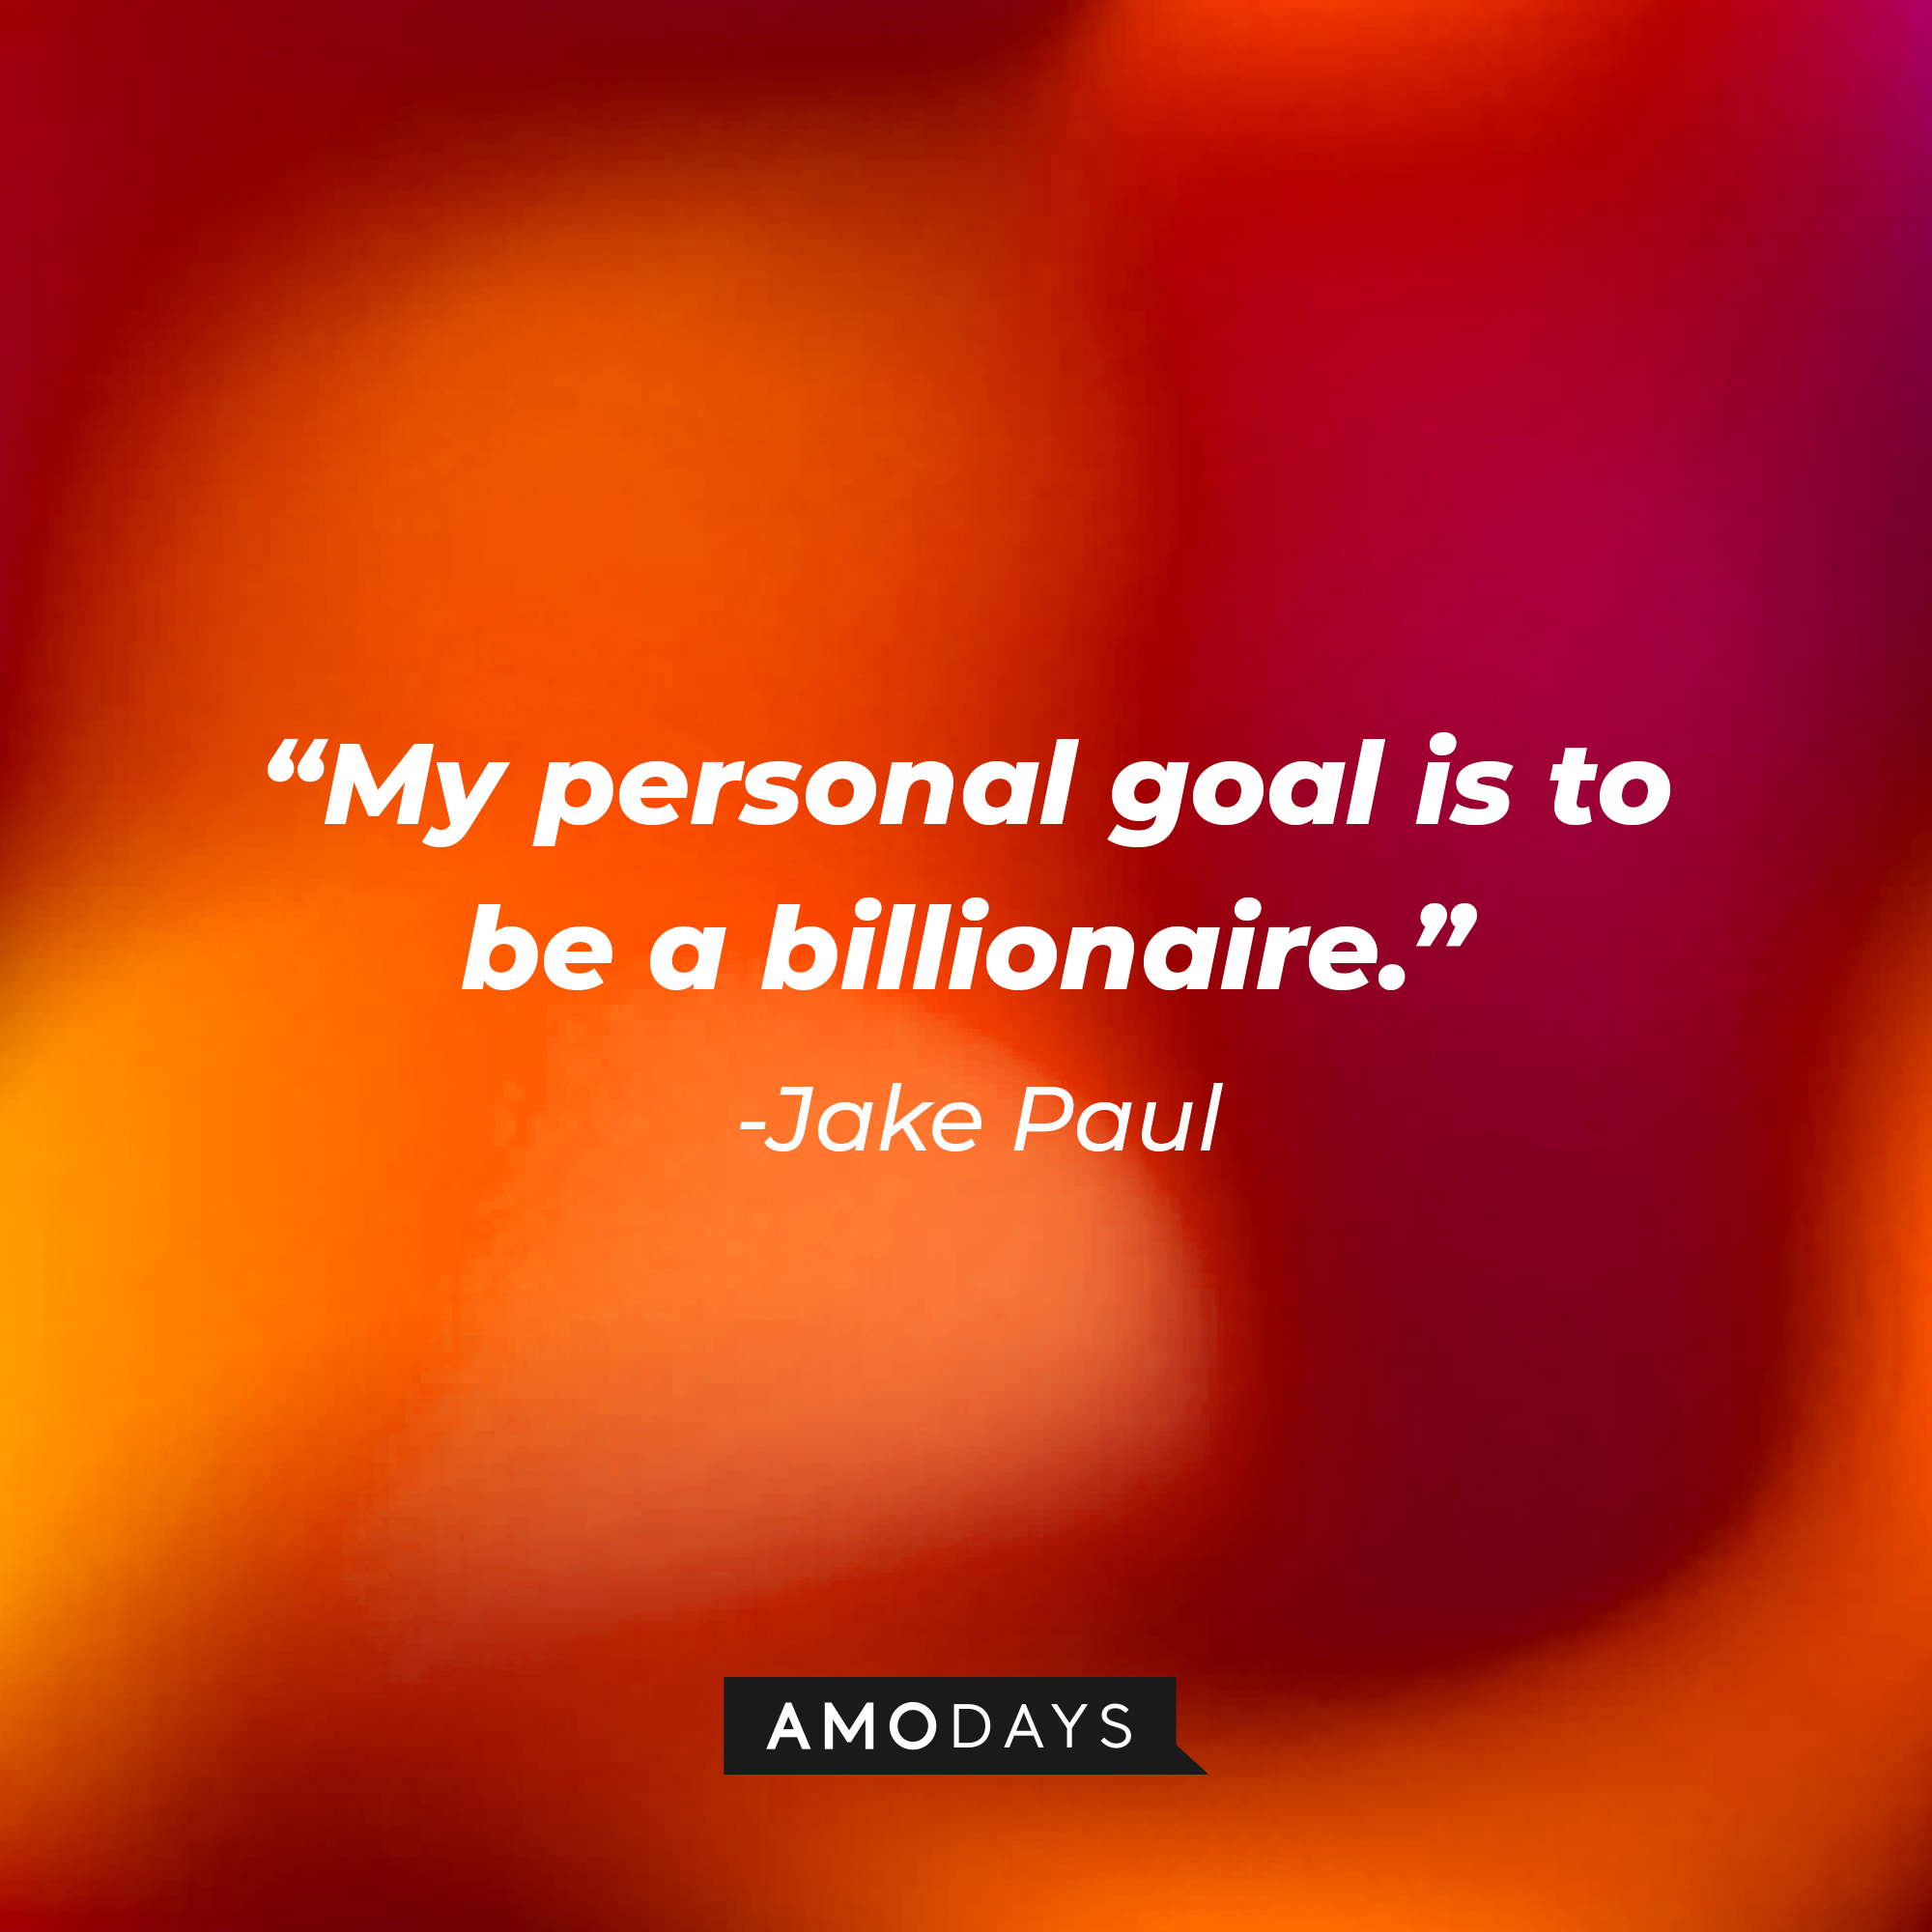 Jake Paul’s quote: "My personal goal is to be a billionaire." | Image: Amodays